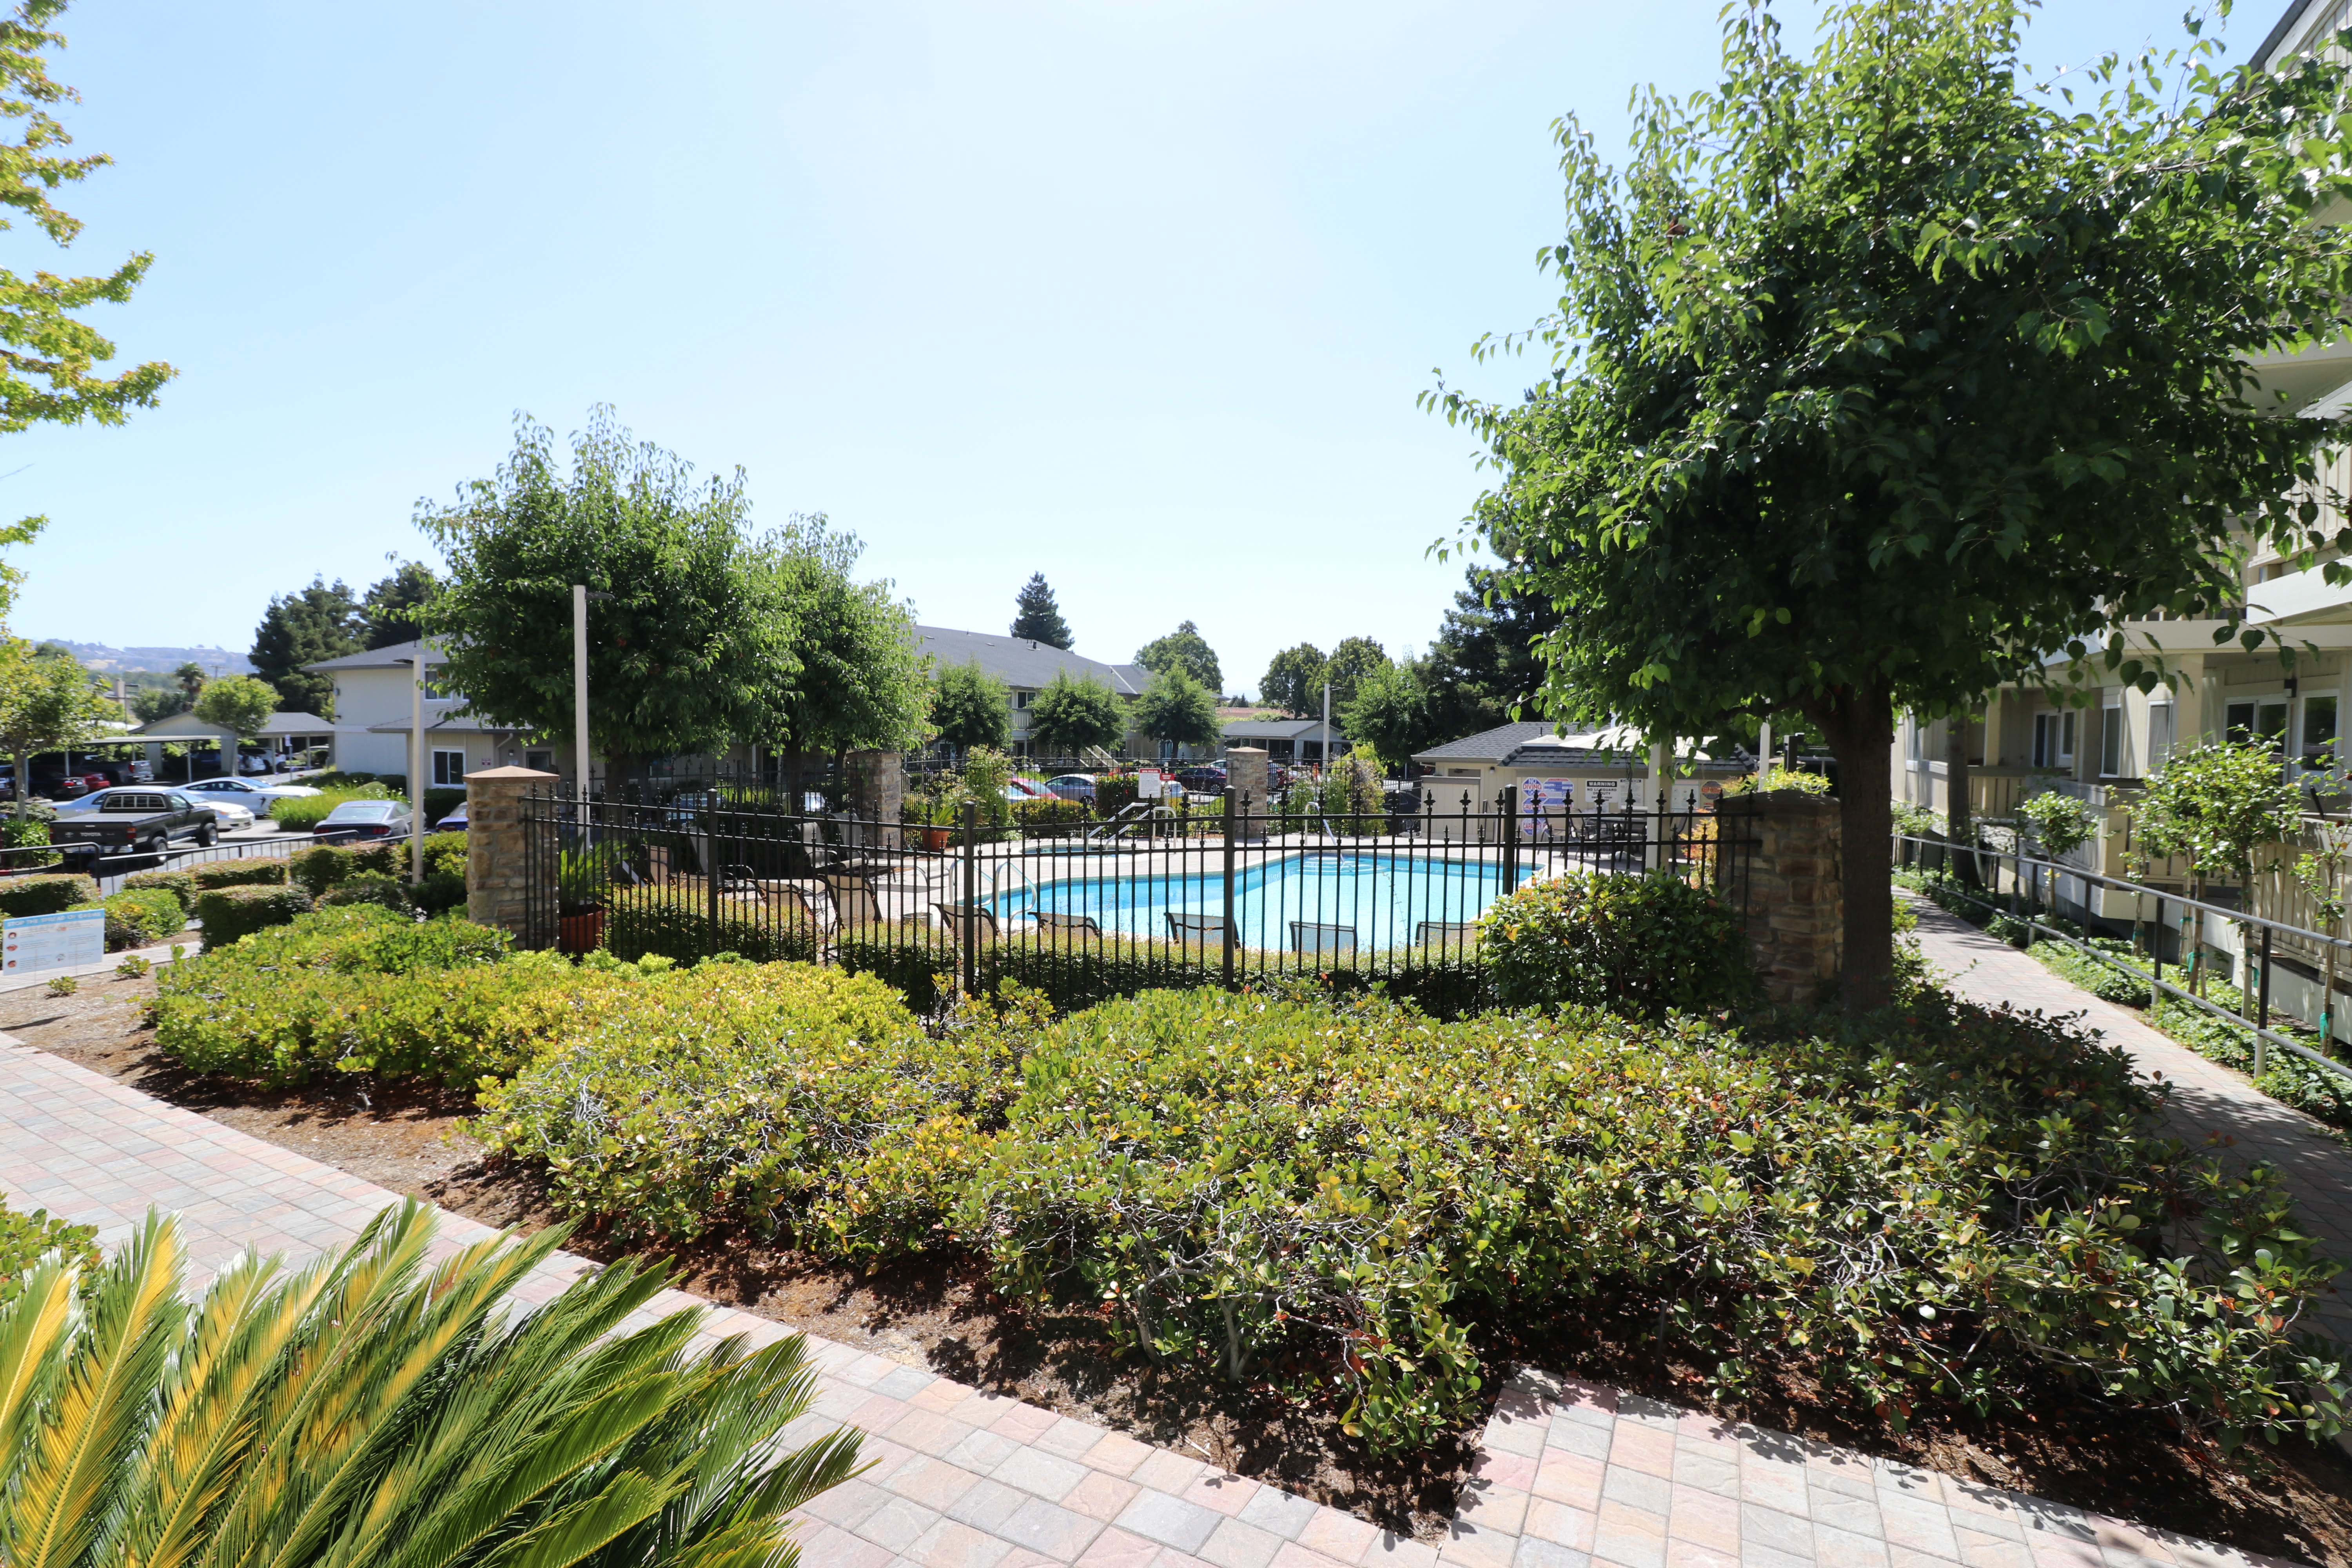 Resort-style pool surrounded by greenery at Summerhill Terrace Apartment Homes in San Leandro, California